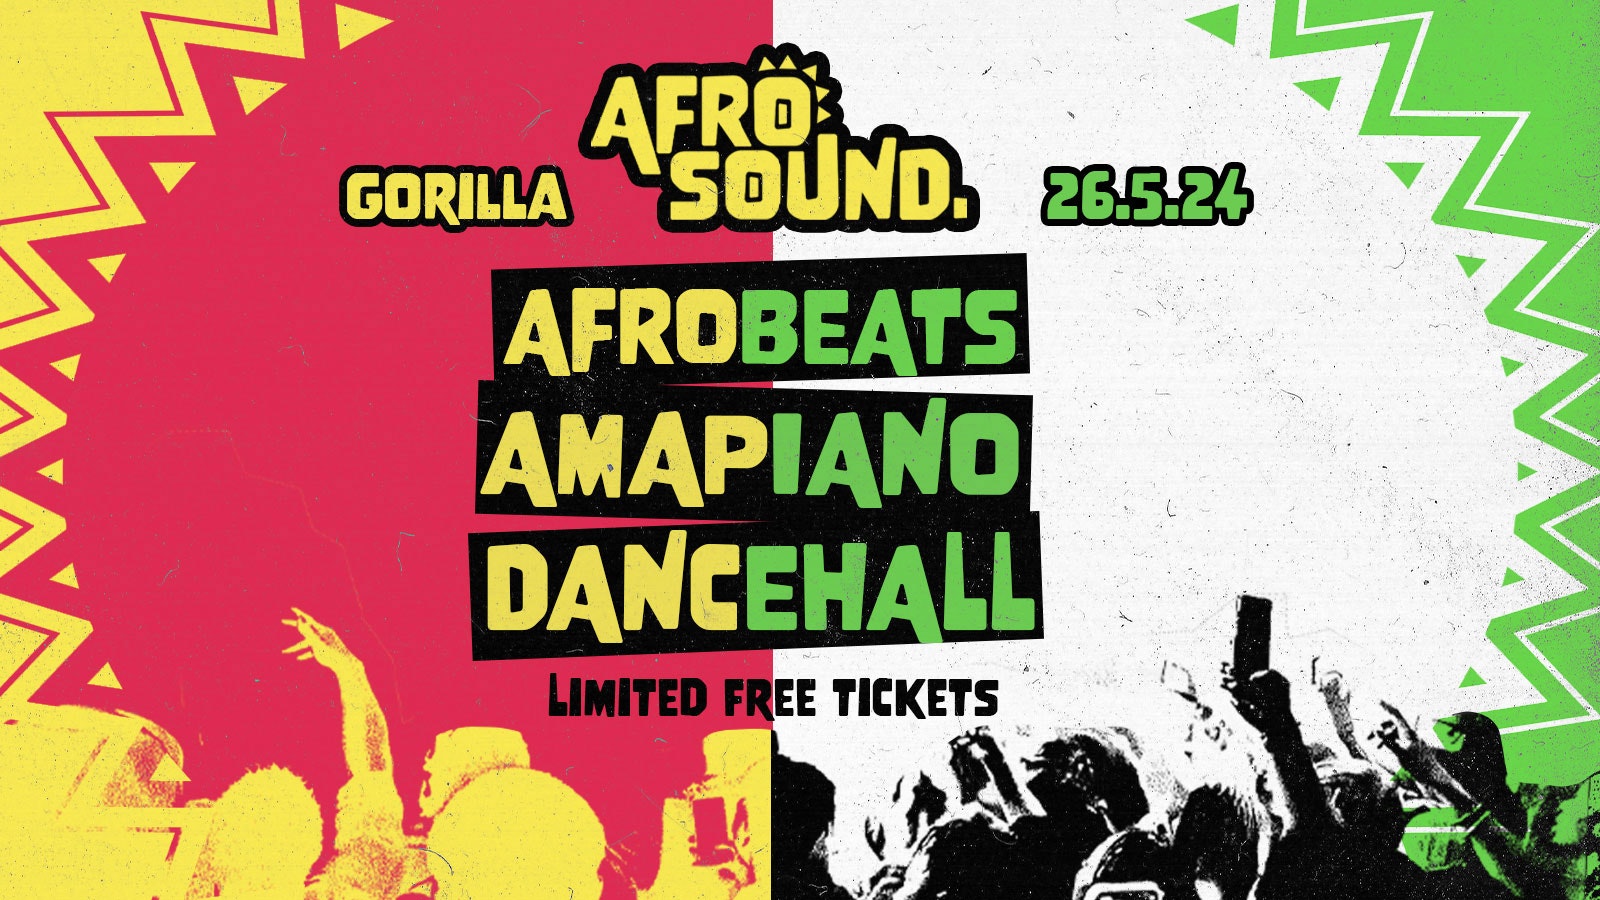 AfroSound AfroCaribbean Special – AFROBEATS, AMAPIANO & DANCEHALL 🌍🇯🇲 (LMTD. FREE TICKETS AVAIL)